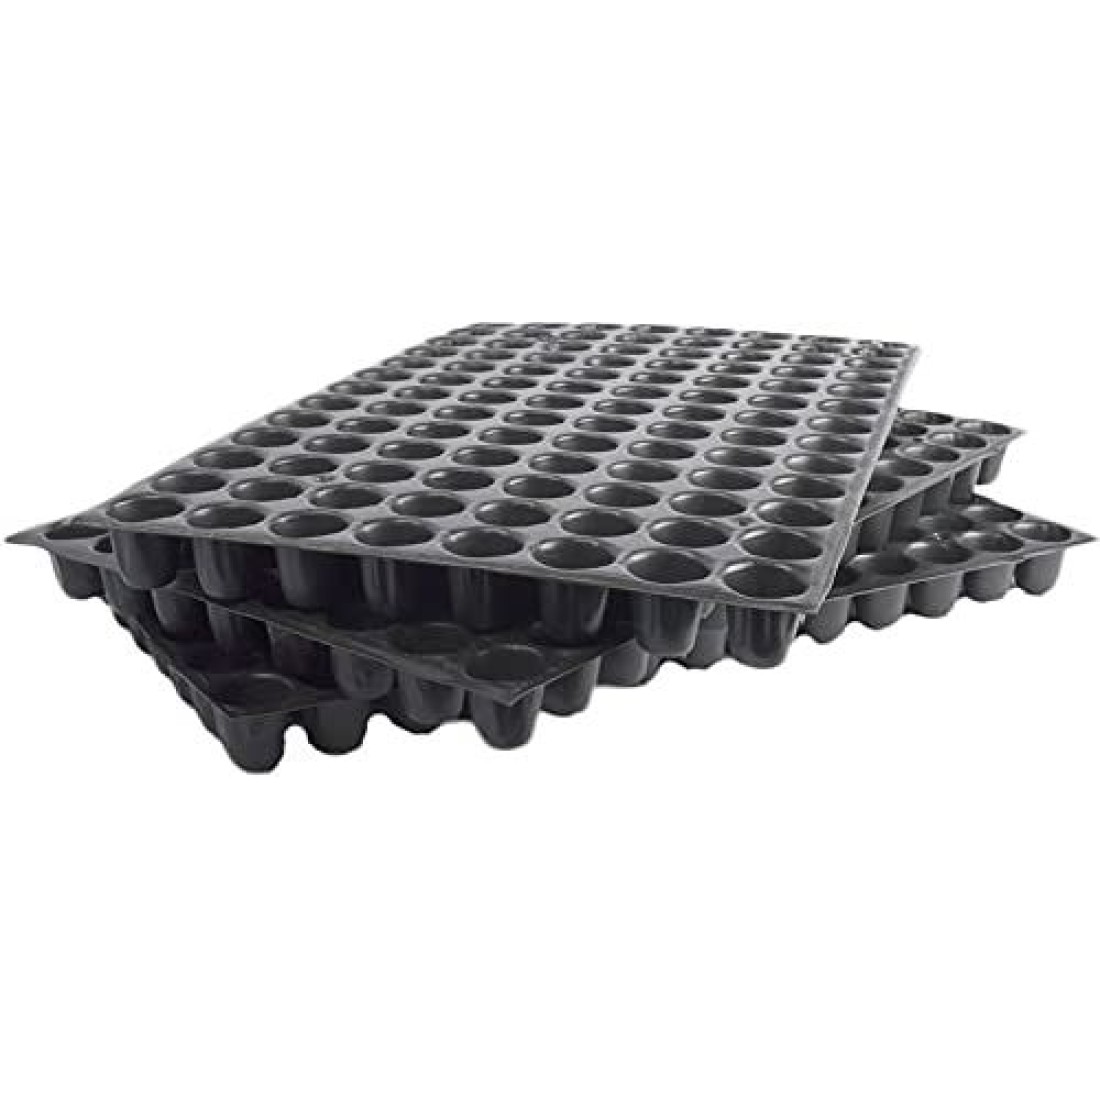 Plastic Seedling Tray Reusable Sturdy and Durable Black for Seed Germination 50 Cavity ( Pack of 5 Trays) 1